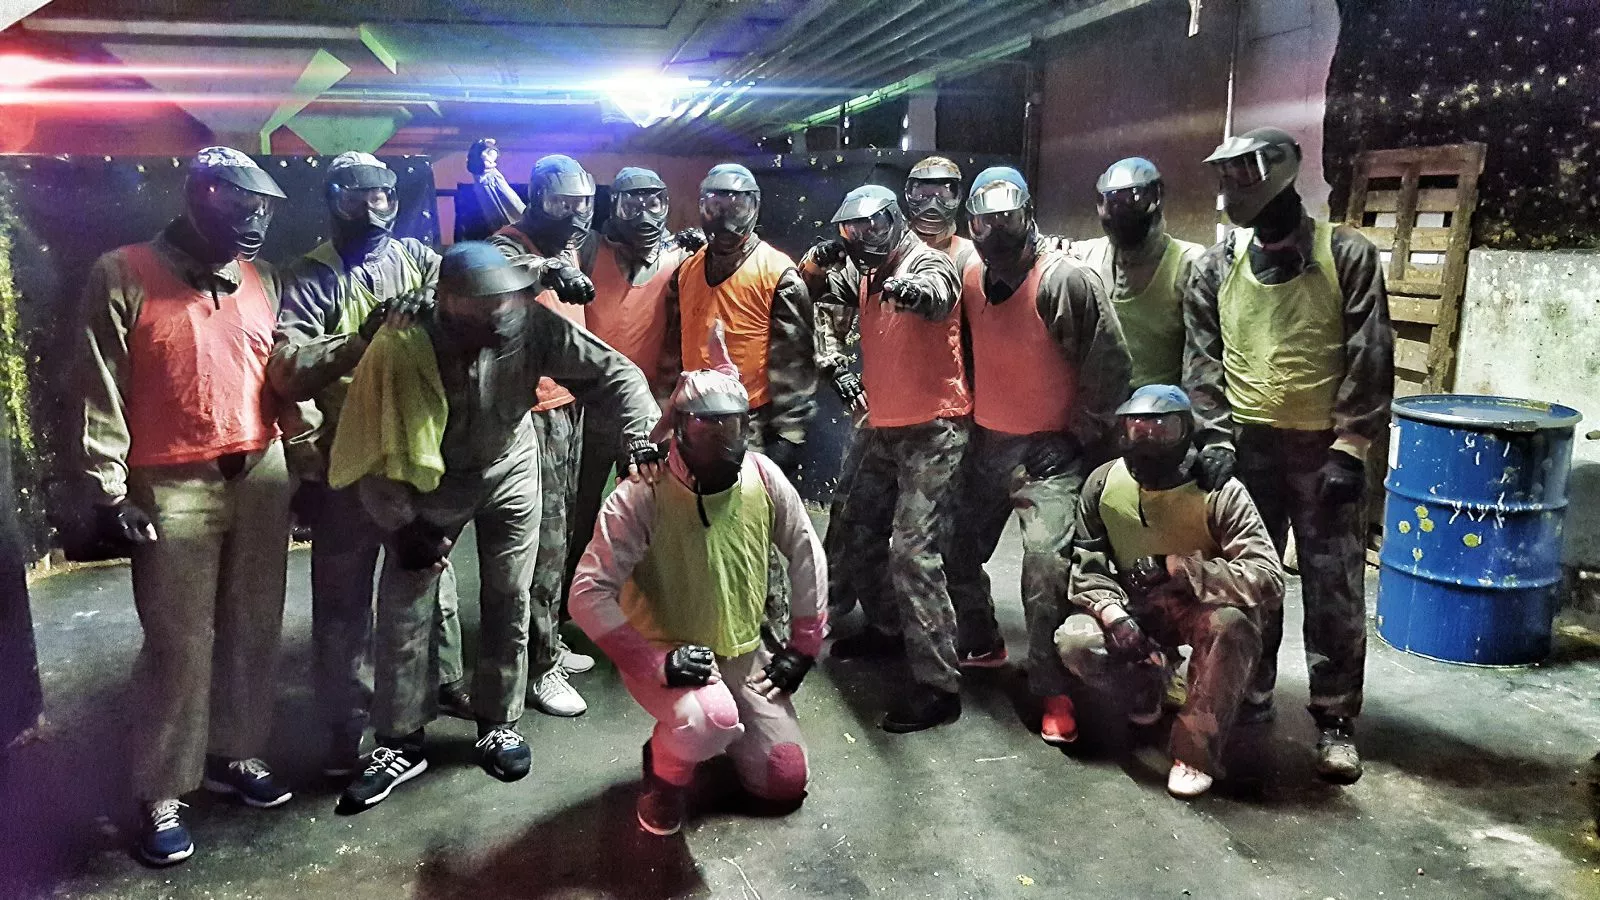 Stag party group on paintball